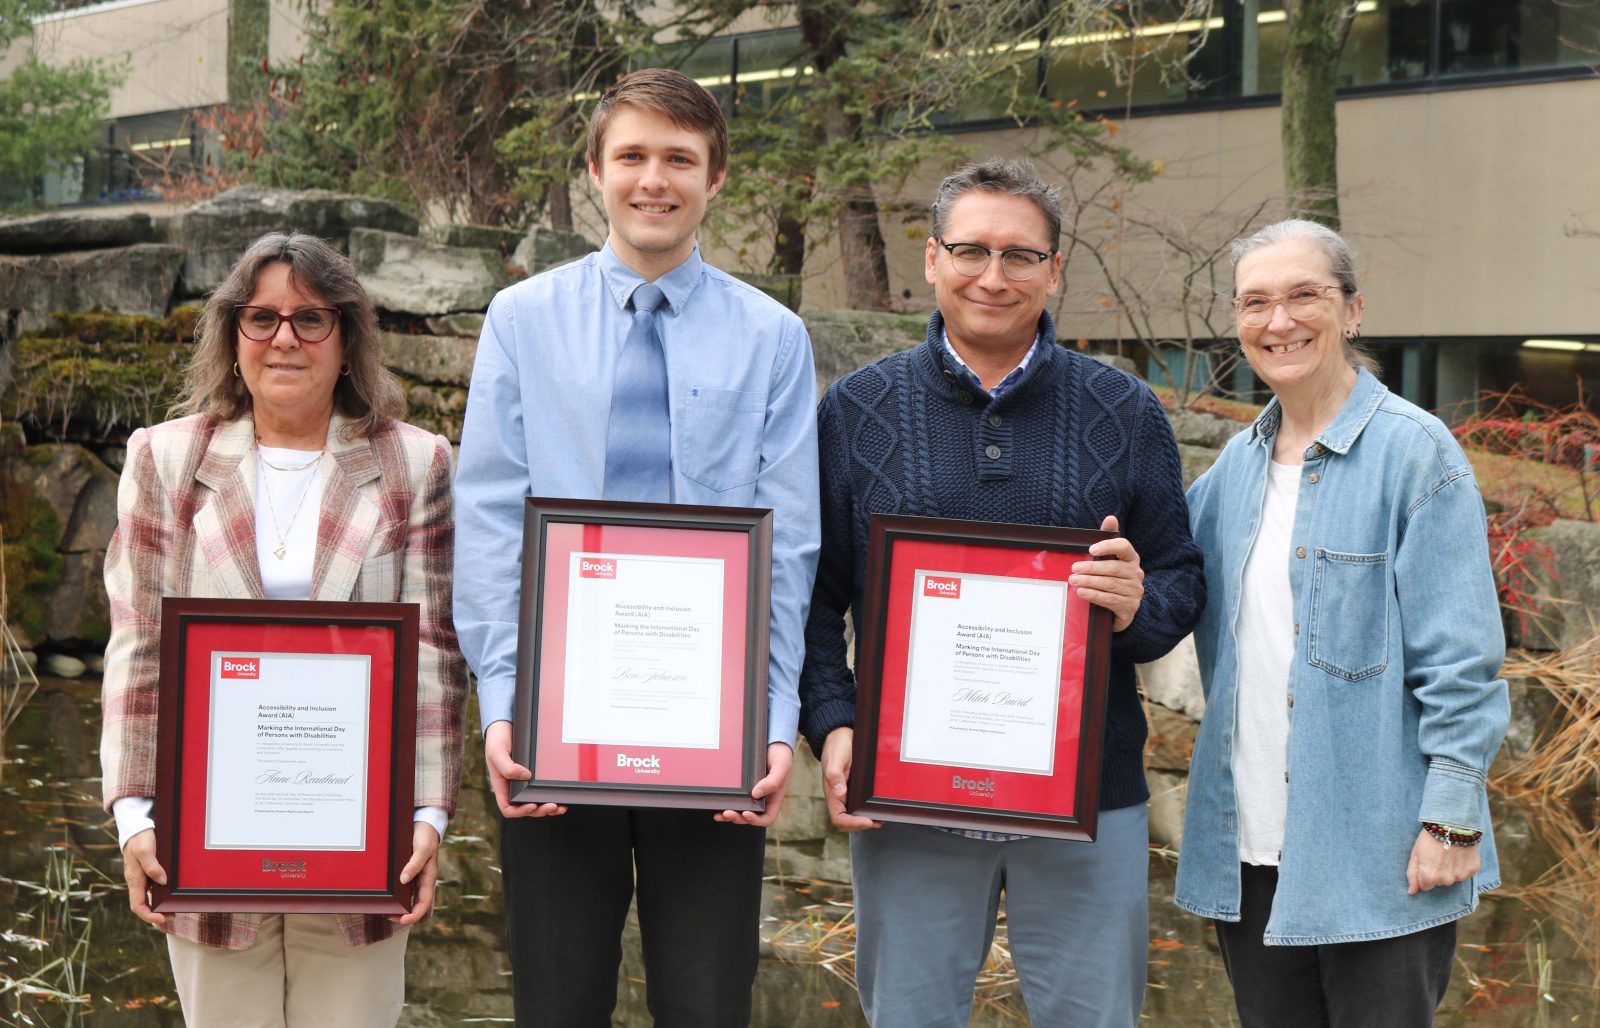 Four people stand outside near a pond on Brock’s campus, three are holding framed award certificates.